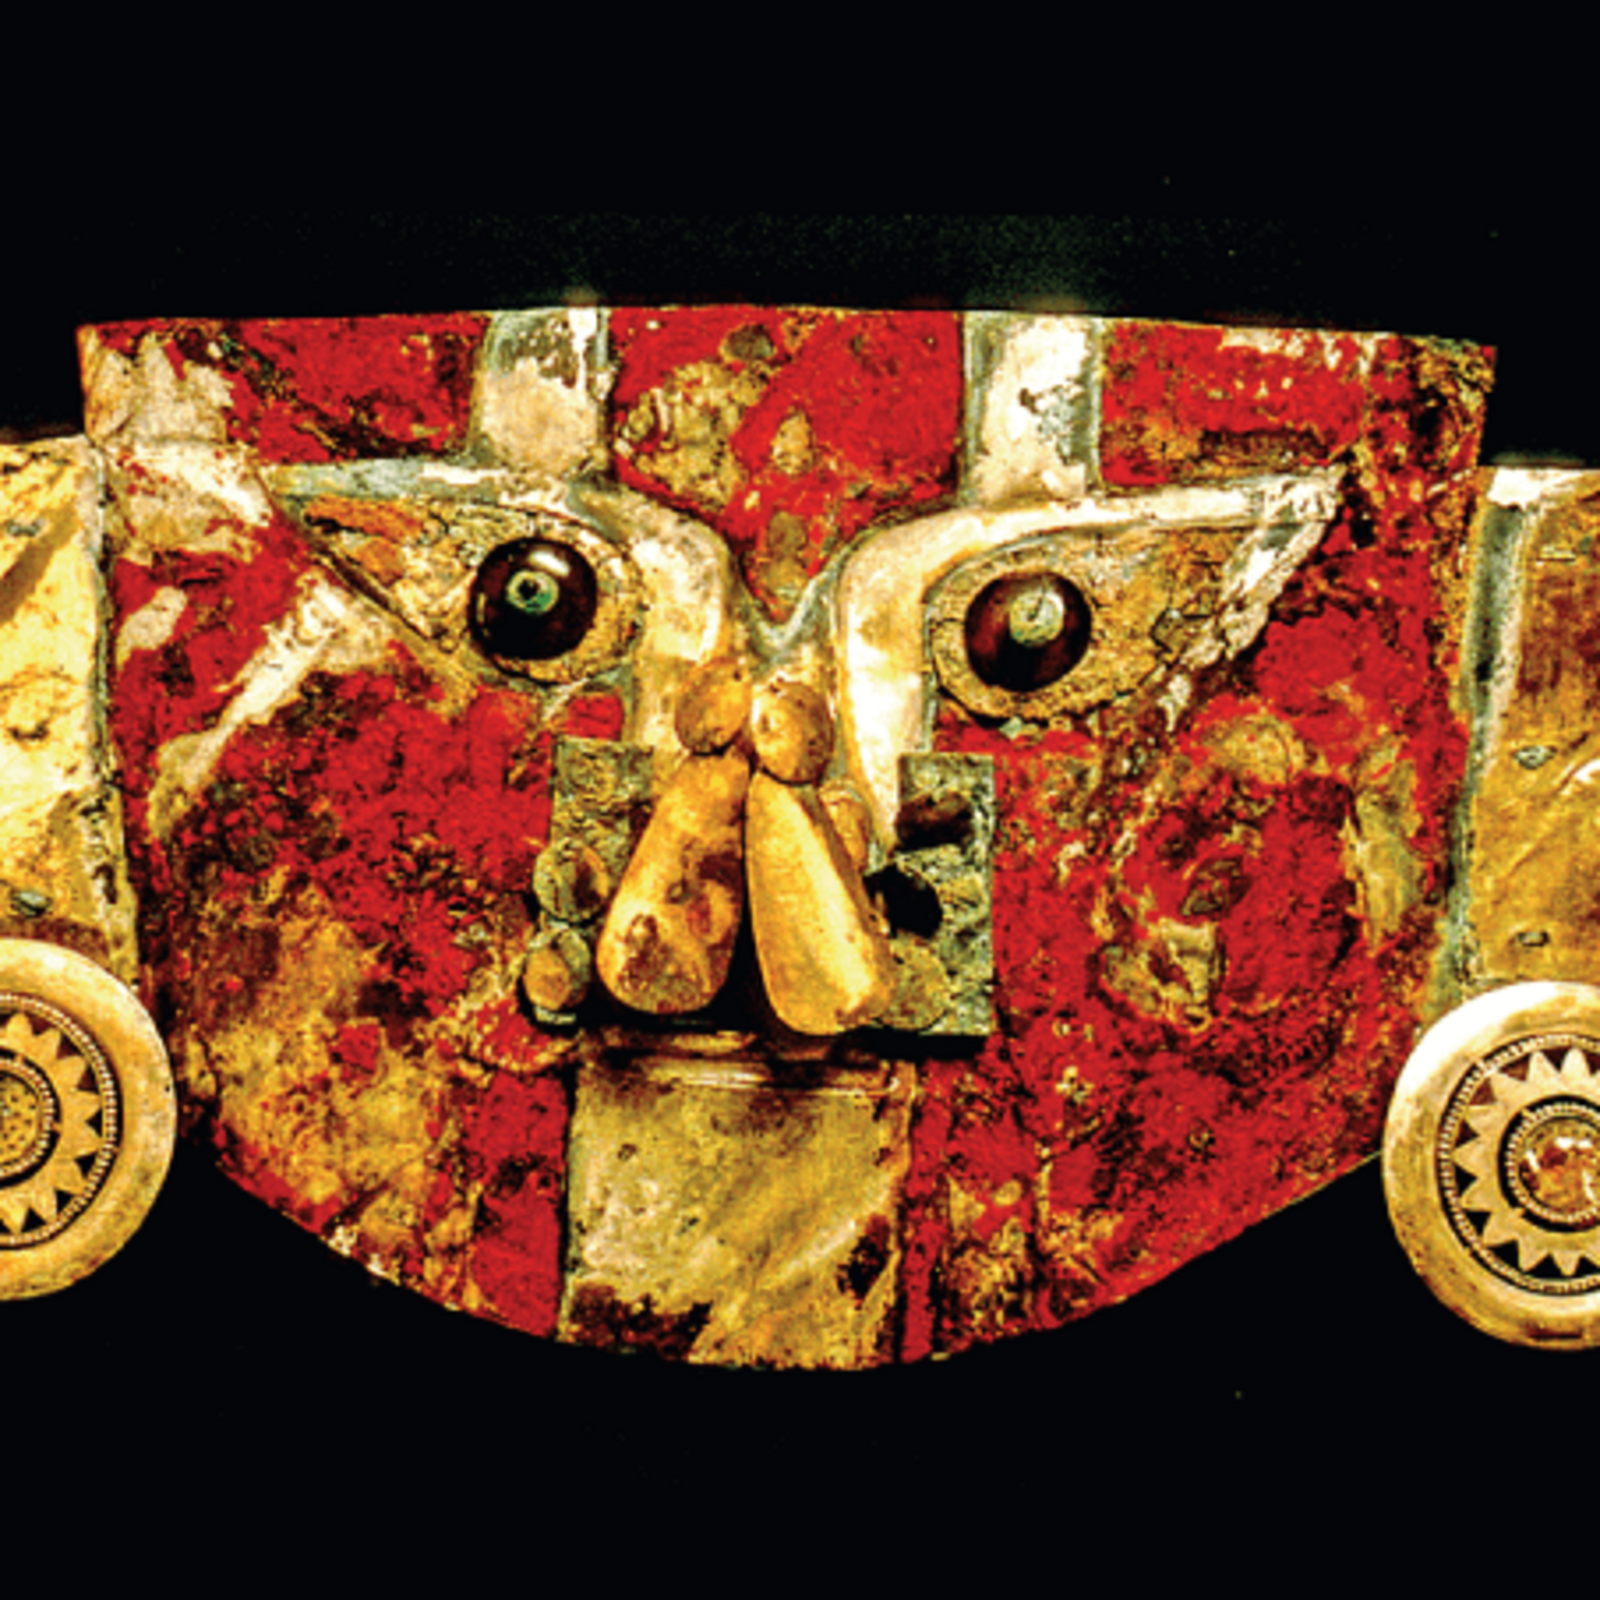 1,000-Year-Old Mask Was Painted With Human Blood